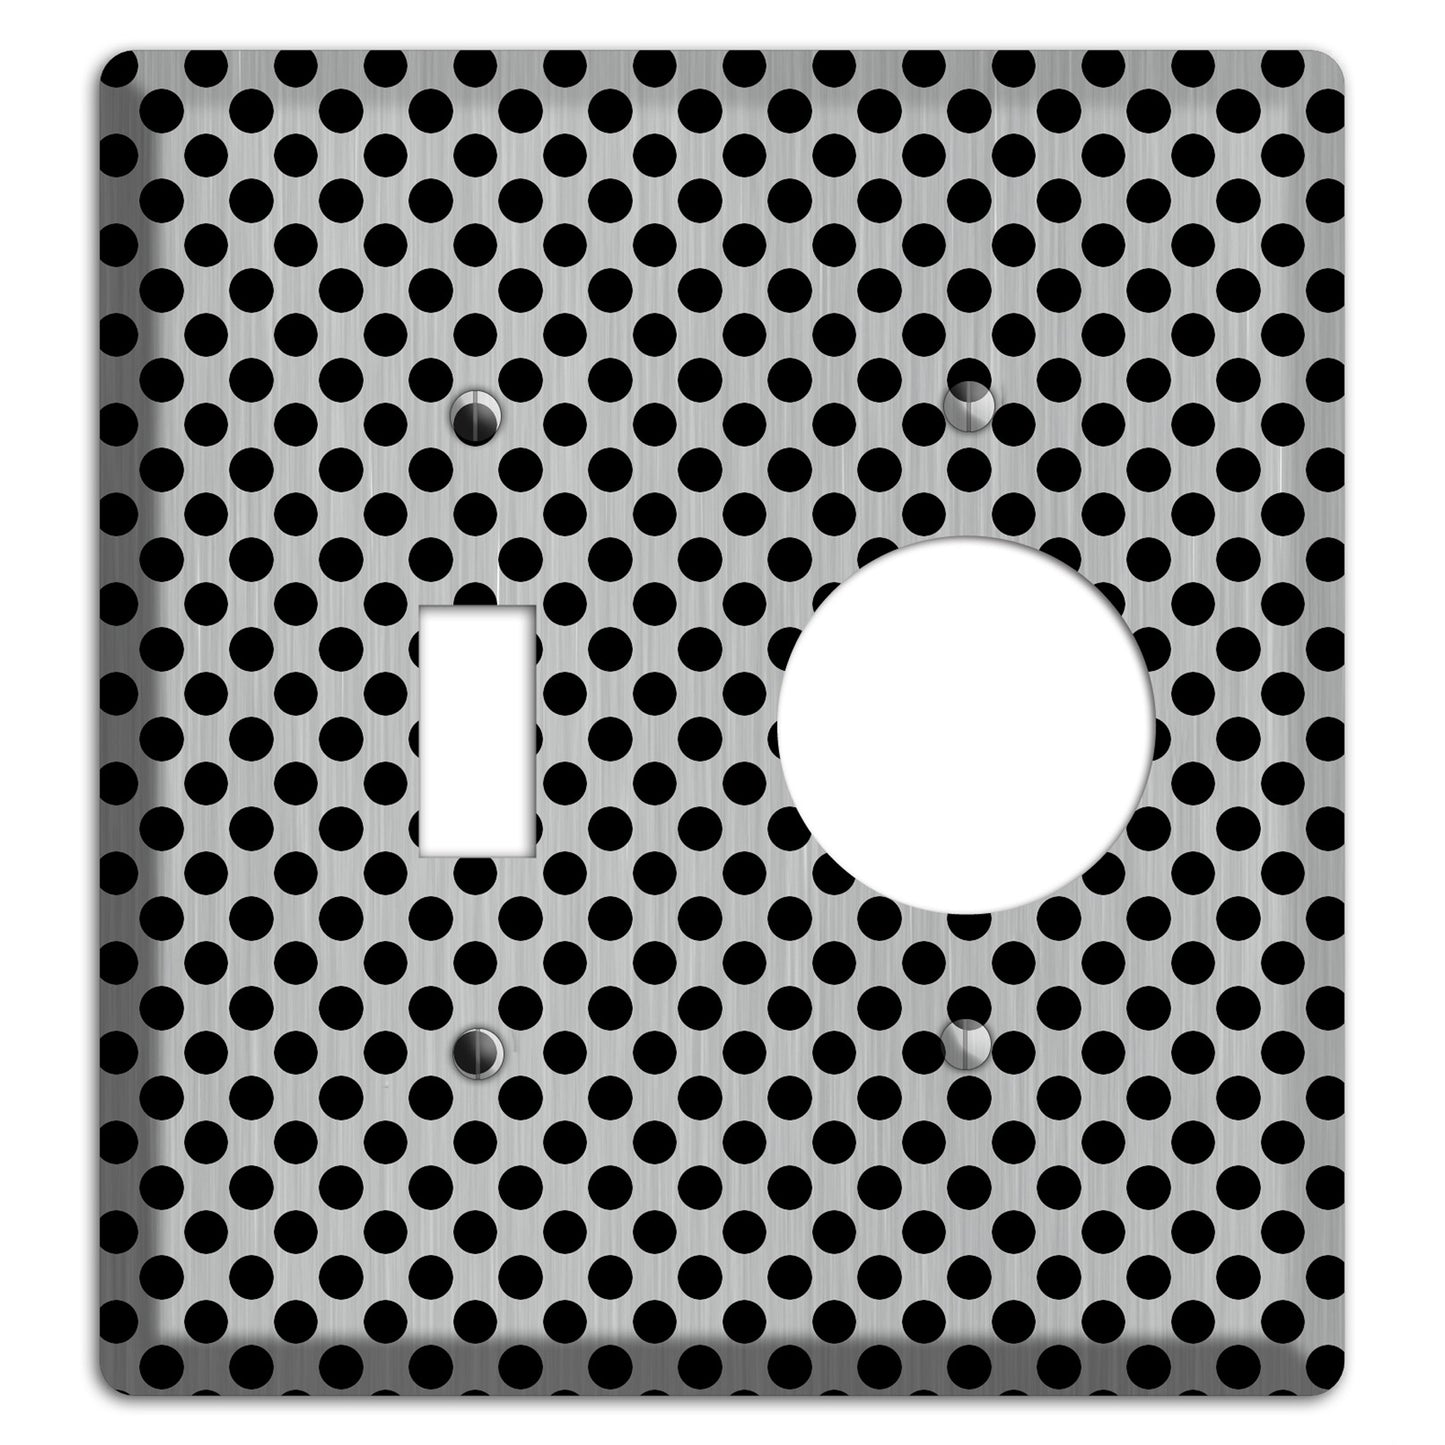 Packed Small Polka Dots Stainless Toggle / Receptacle Wallplate